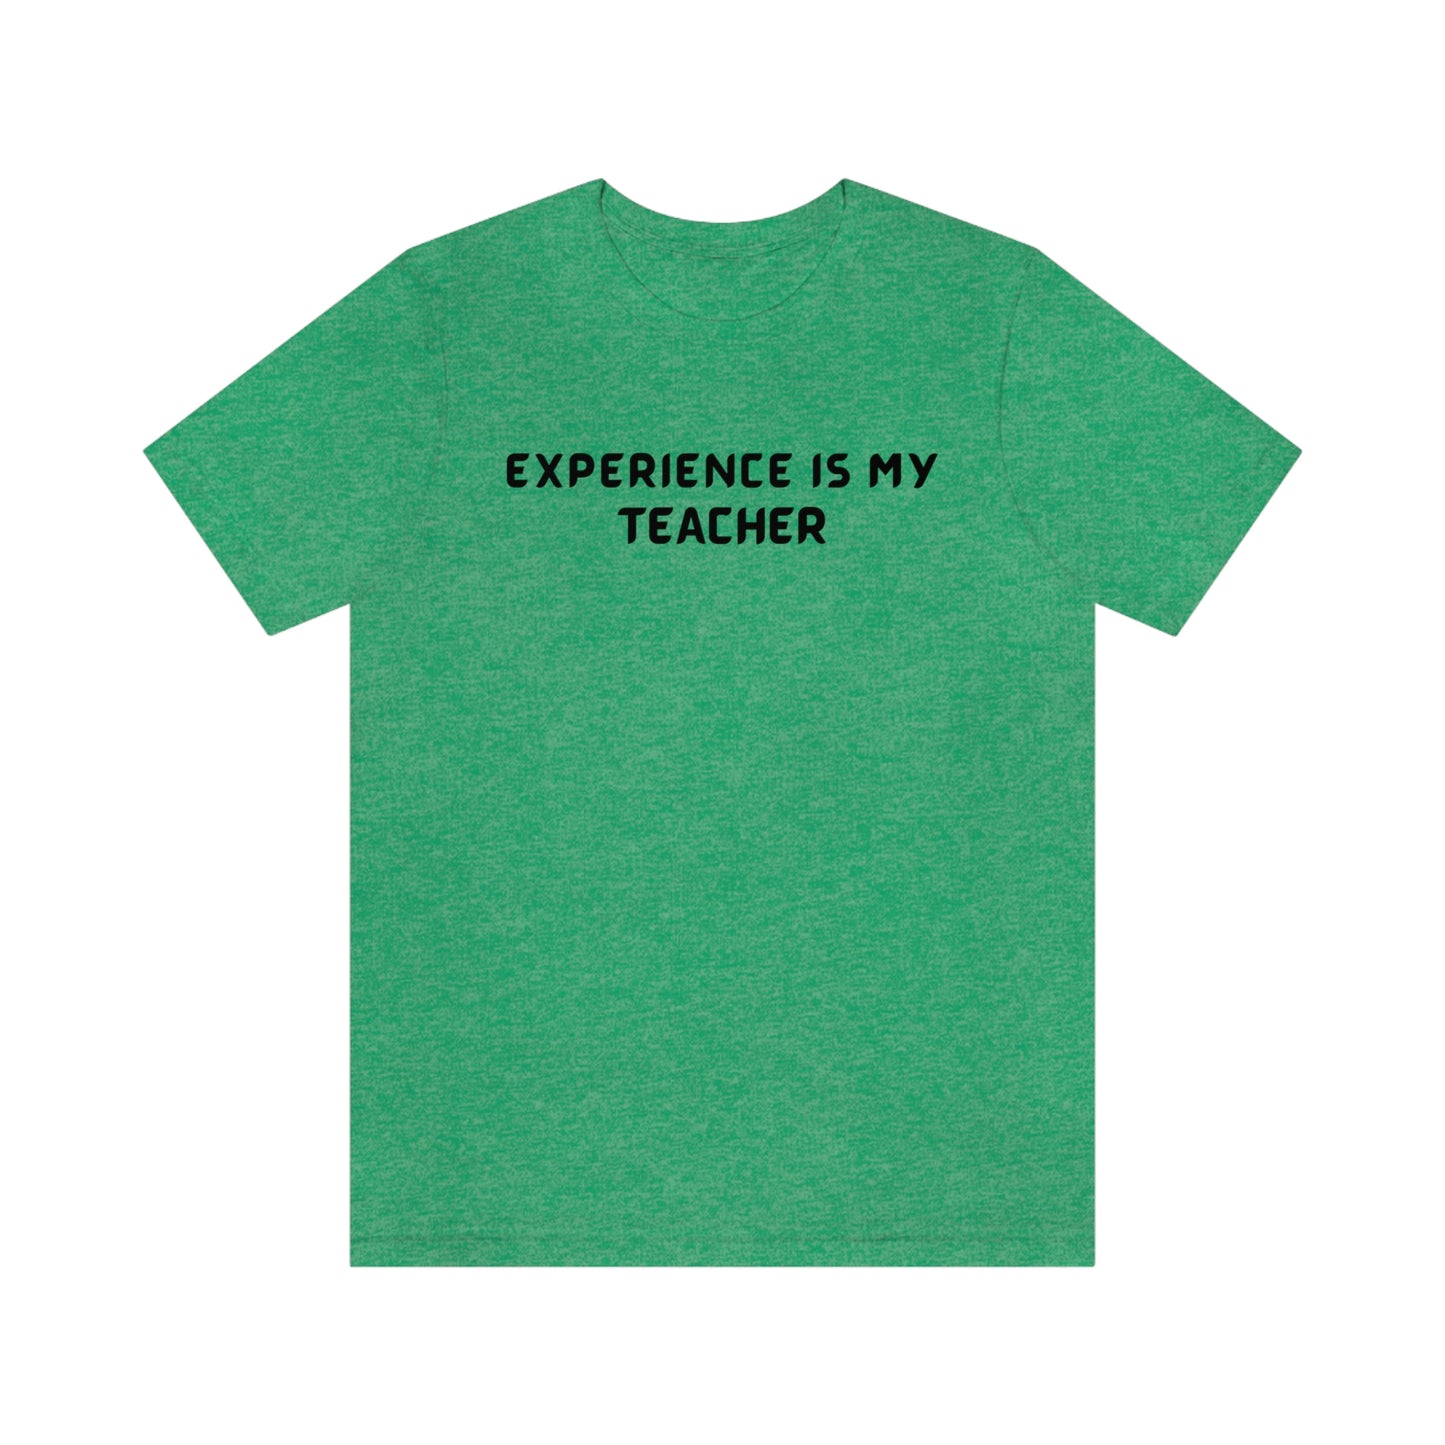 Experience is my teacher unisex t shirt gift, t shirt gift with inspirational words